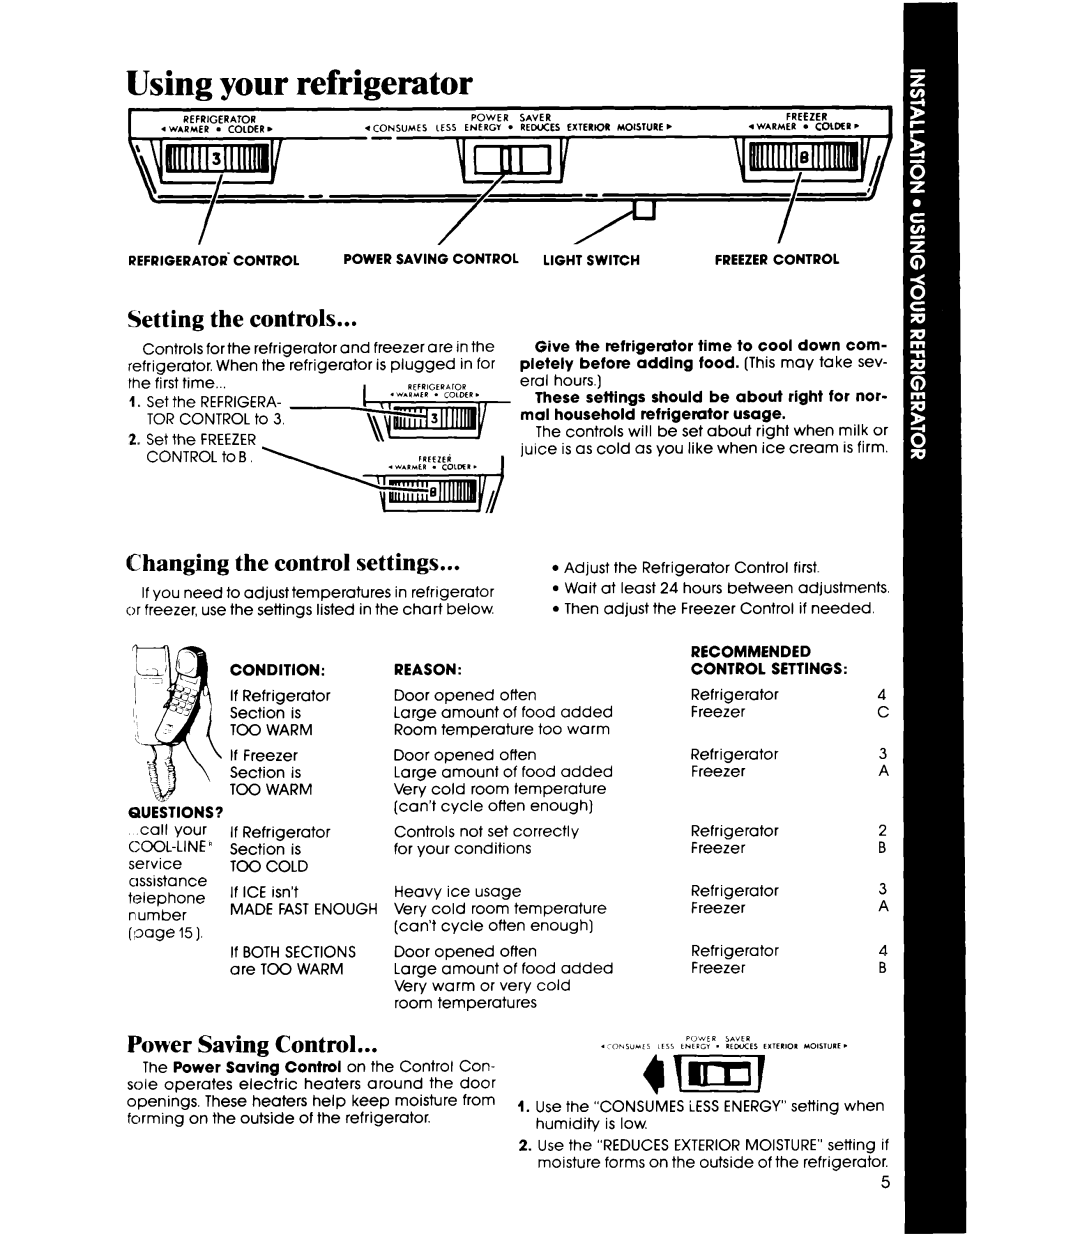 Whirlpool ET18XK manual Using your refrigerator, Setting the controls, Changing the control settings, Power Saving Control 